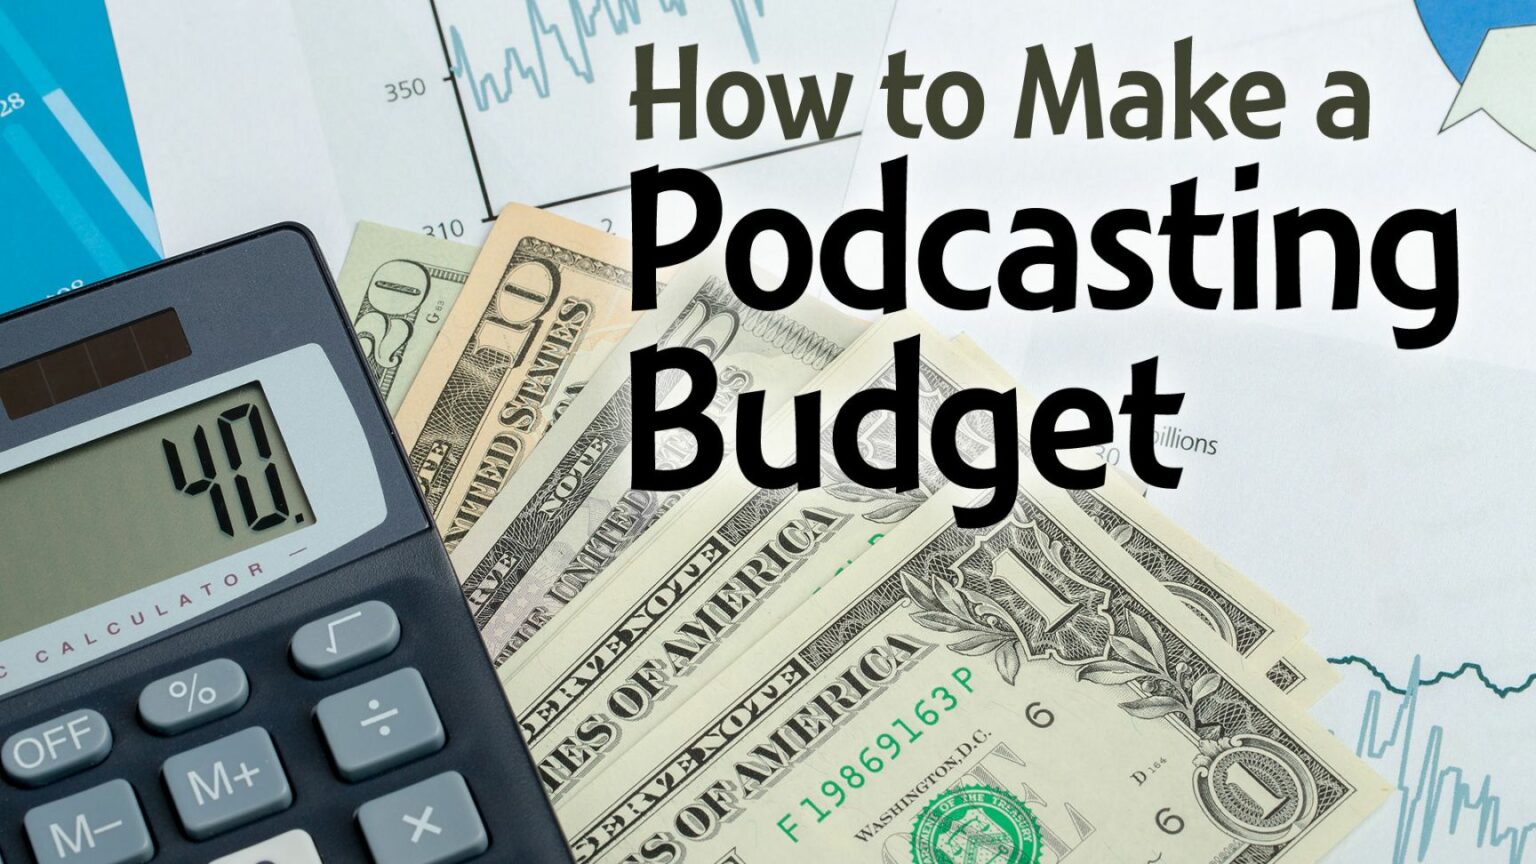 Podcast Budget Template